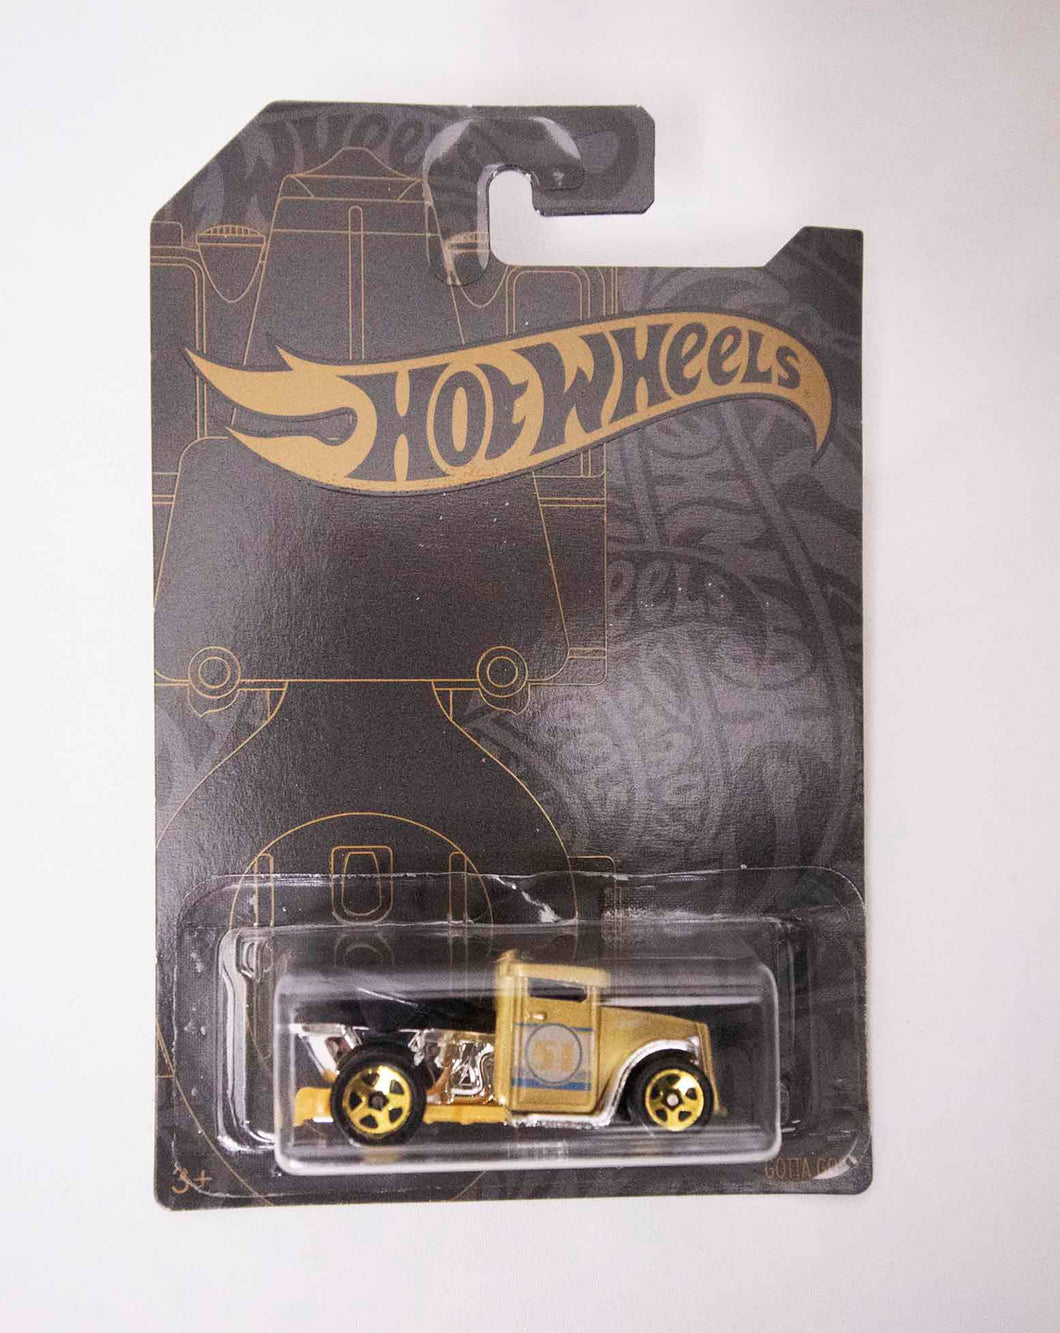 Toy Diecast 1:64 - Hot Wheels - Gotta Go! - 2019 - 51st Anniversary Collection - CHASE / Treasure Hunt - NEW - MOC